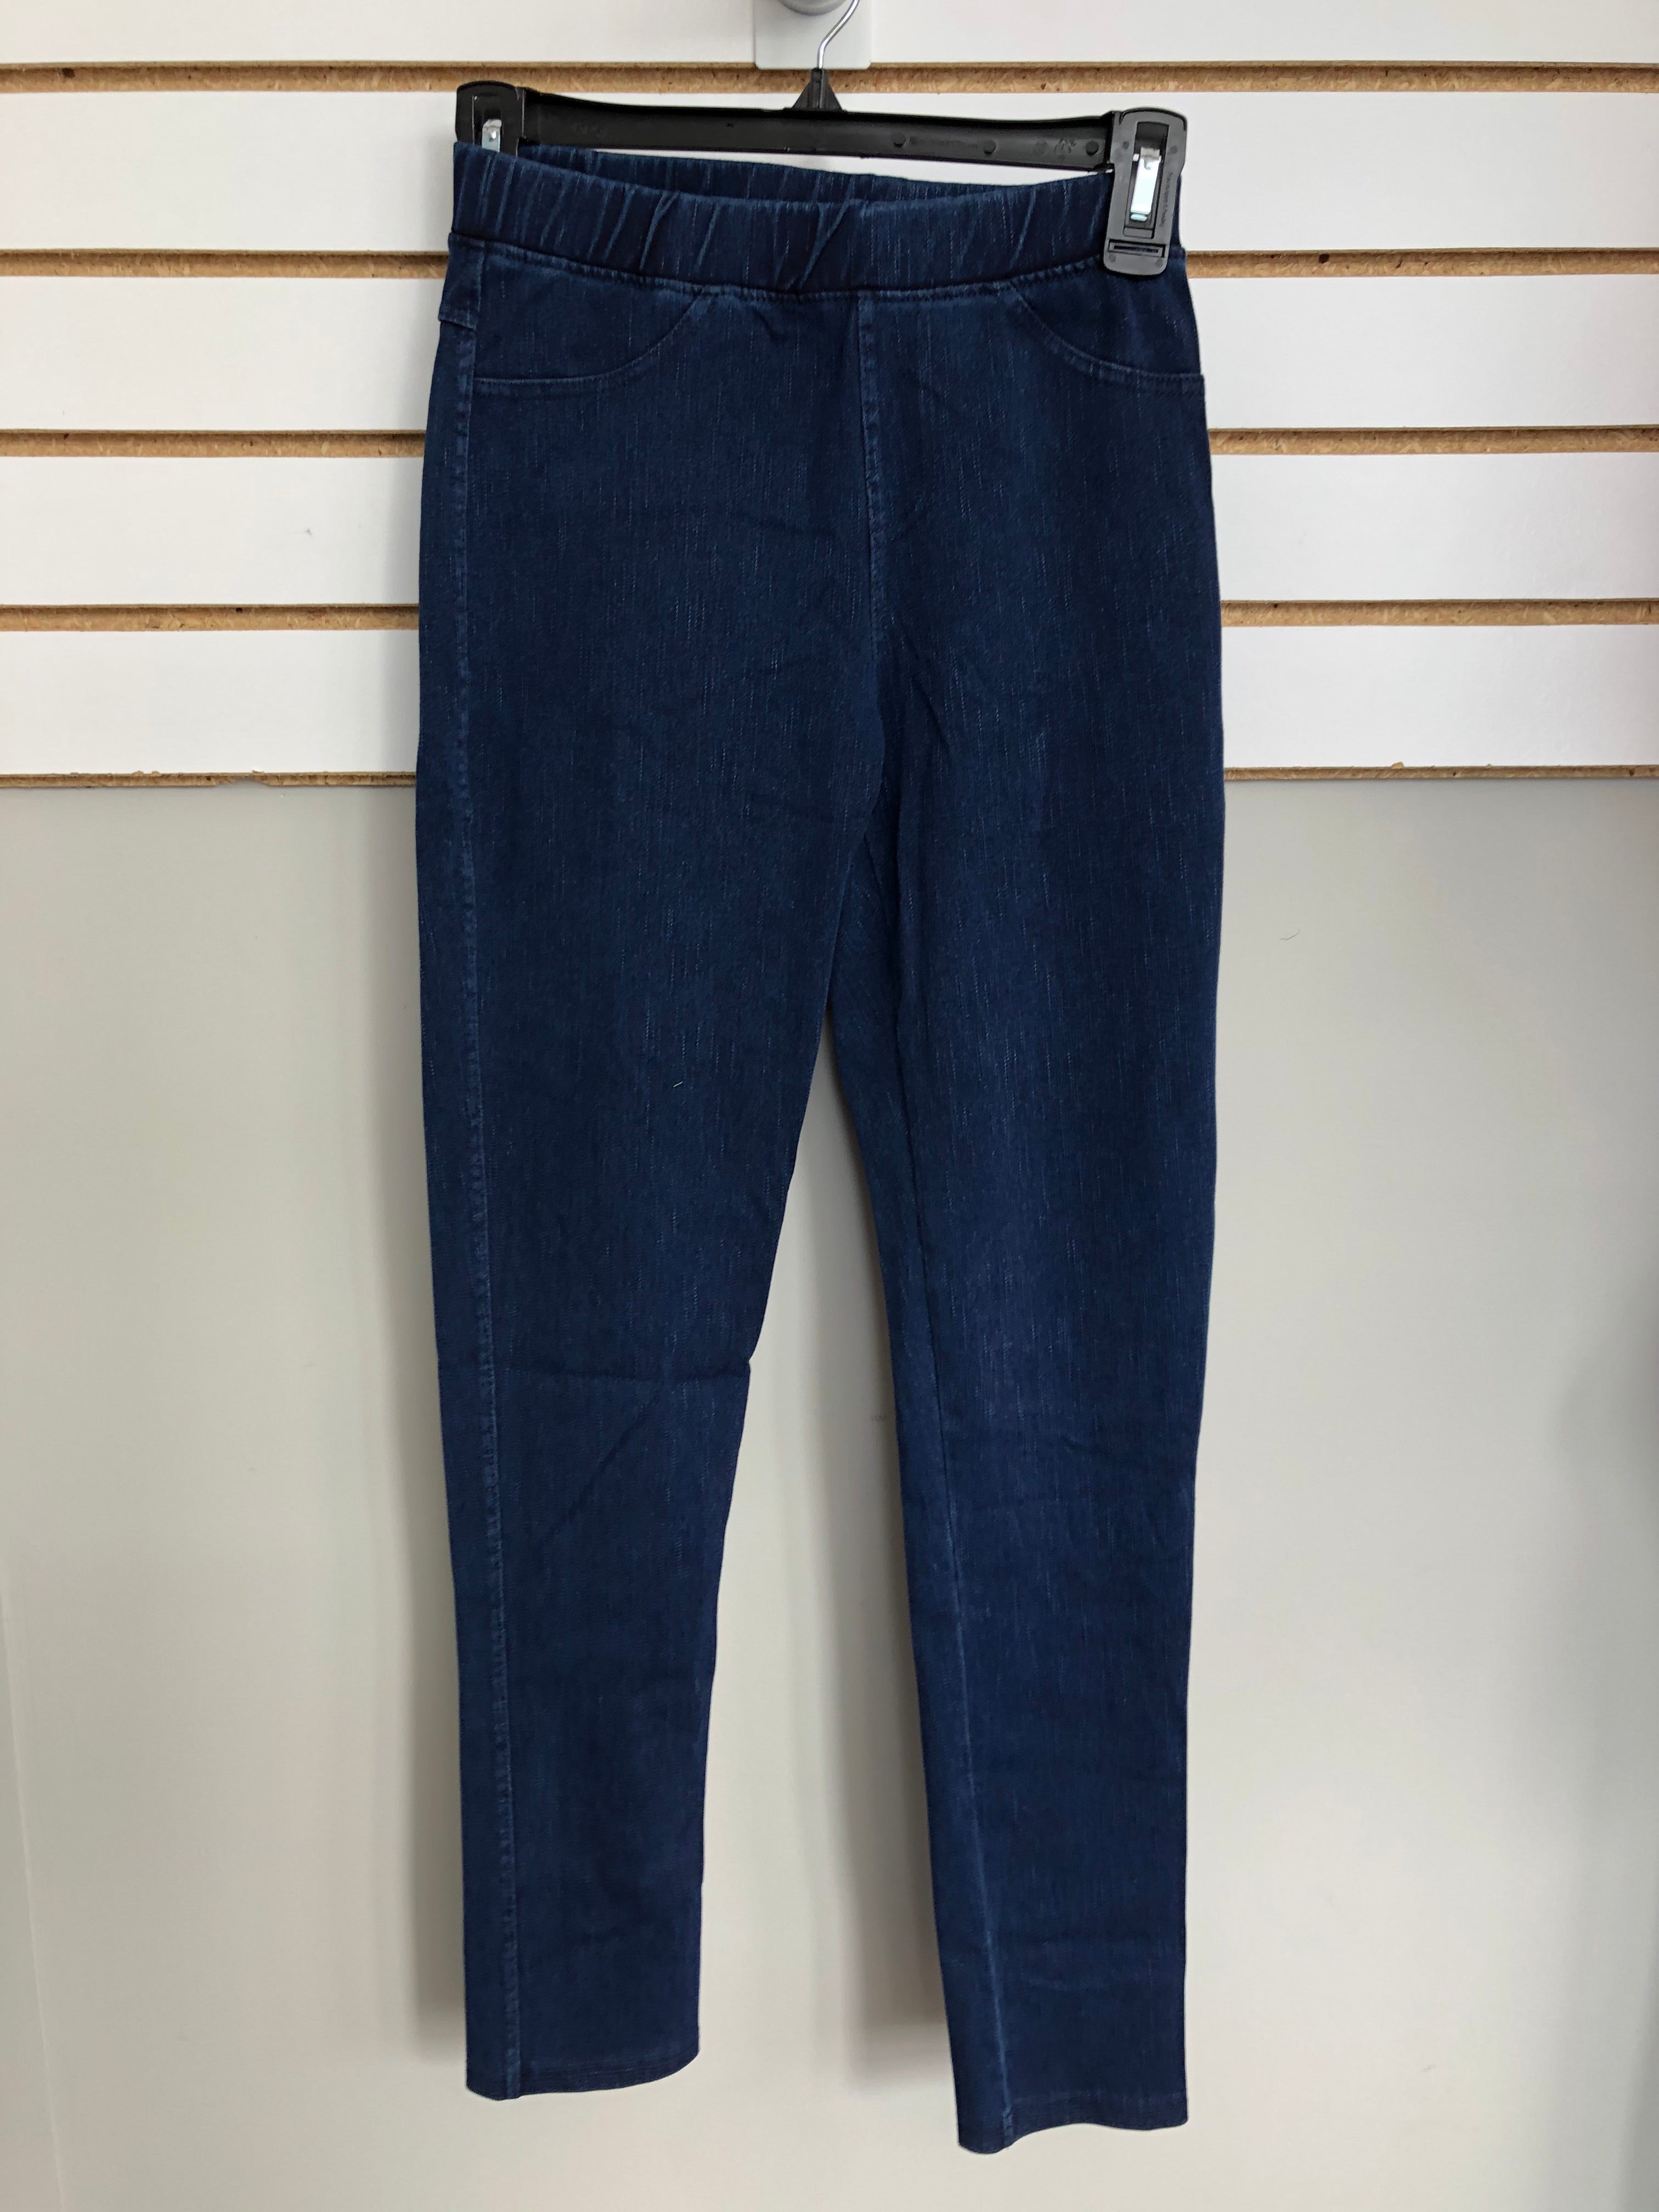 Blue Stitch Jeggings with No Distress